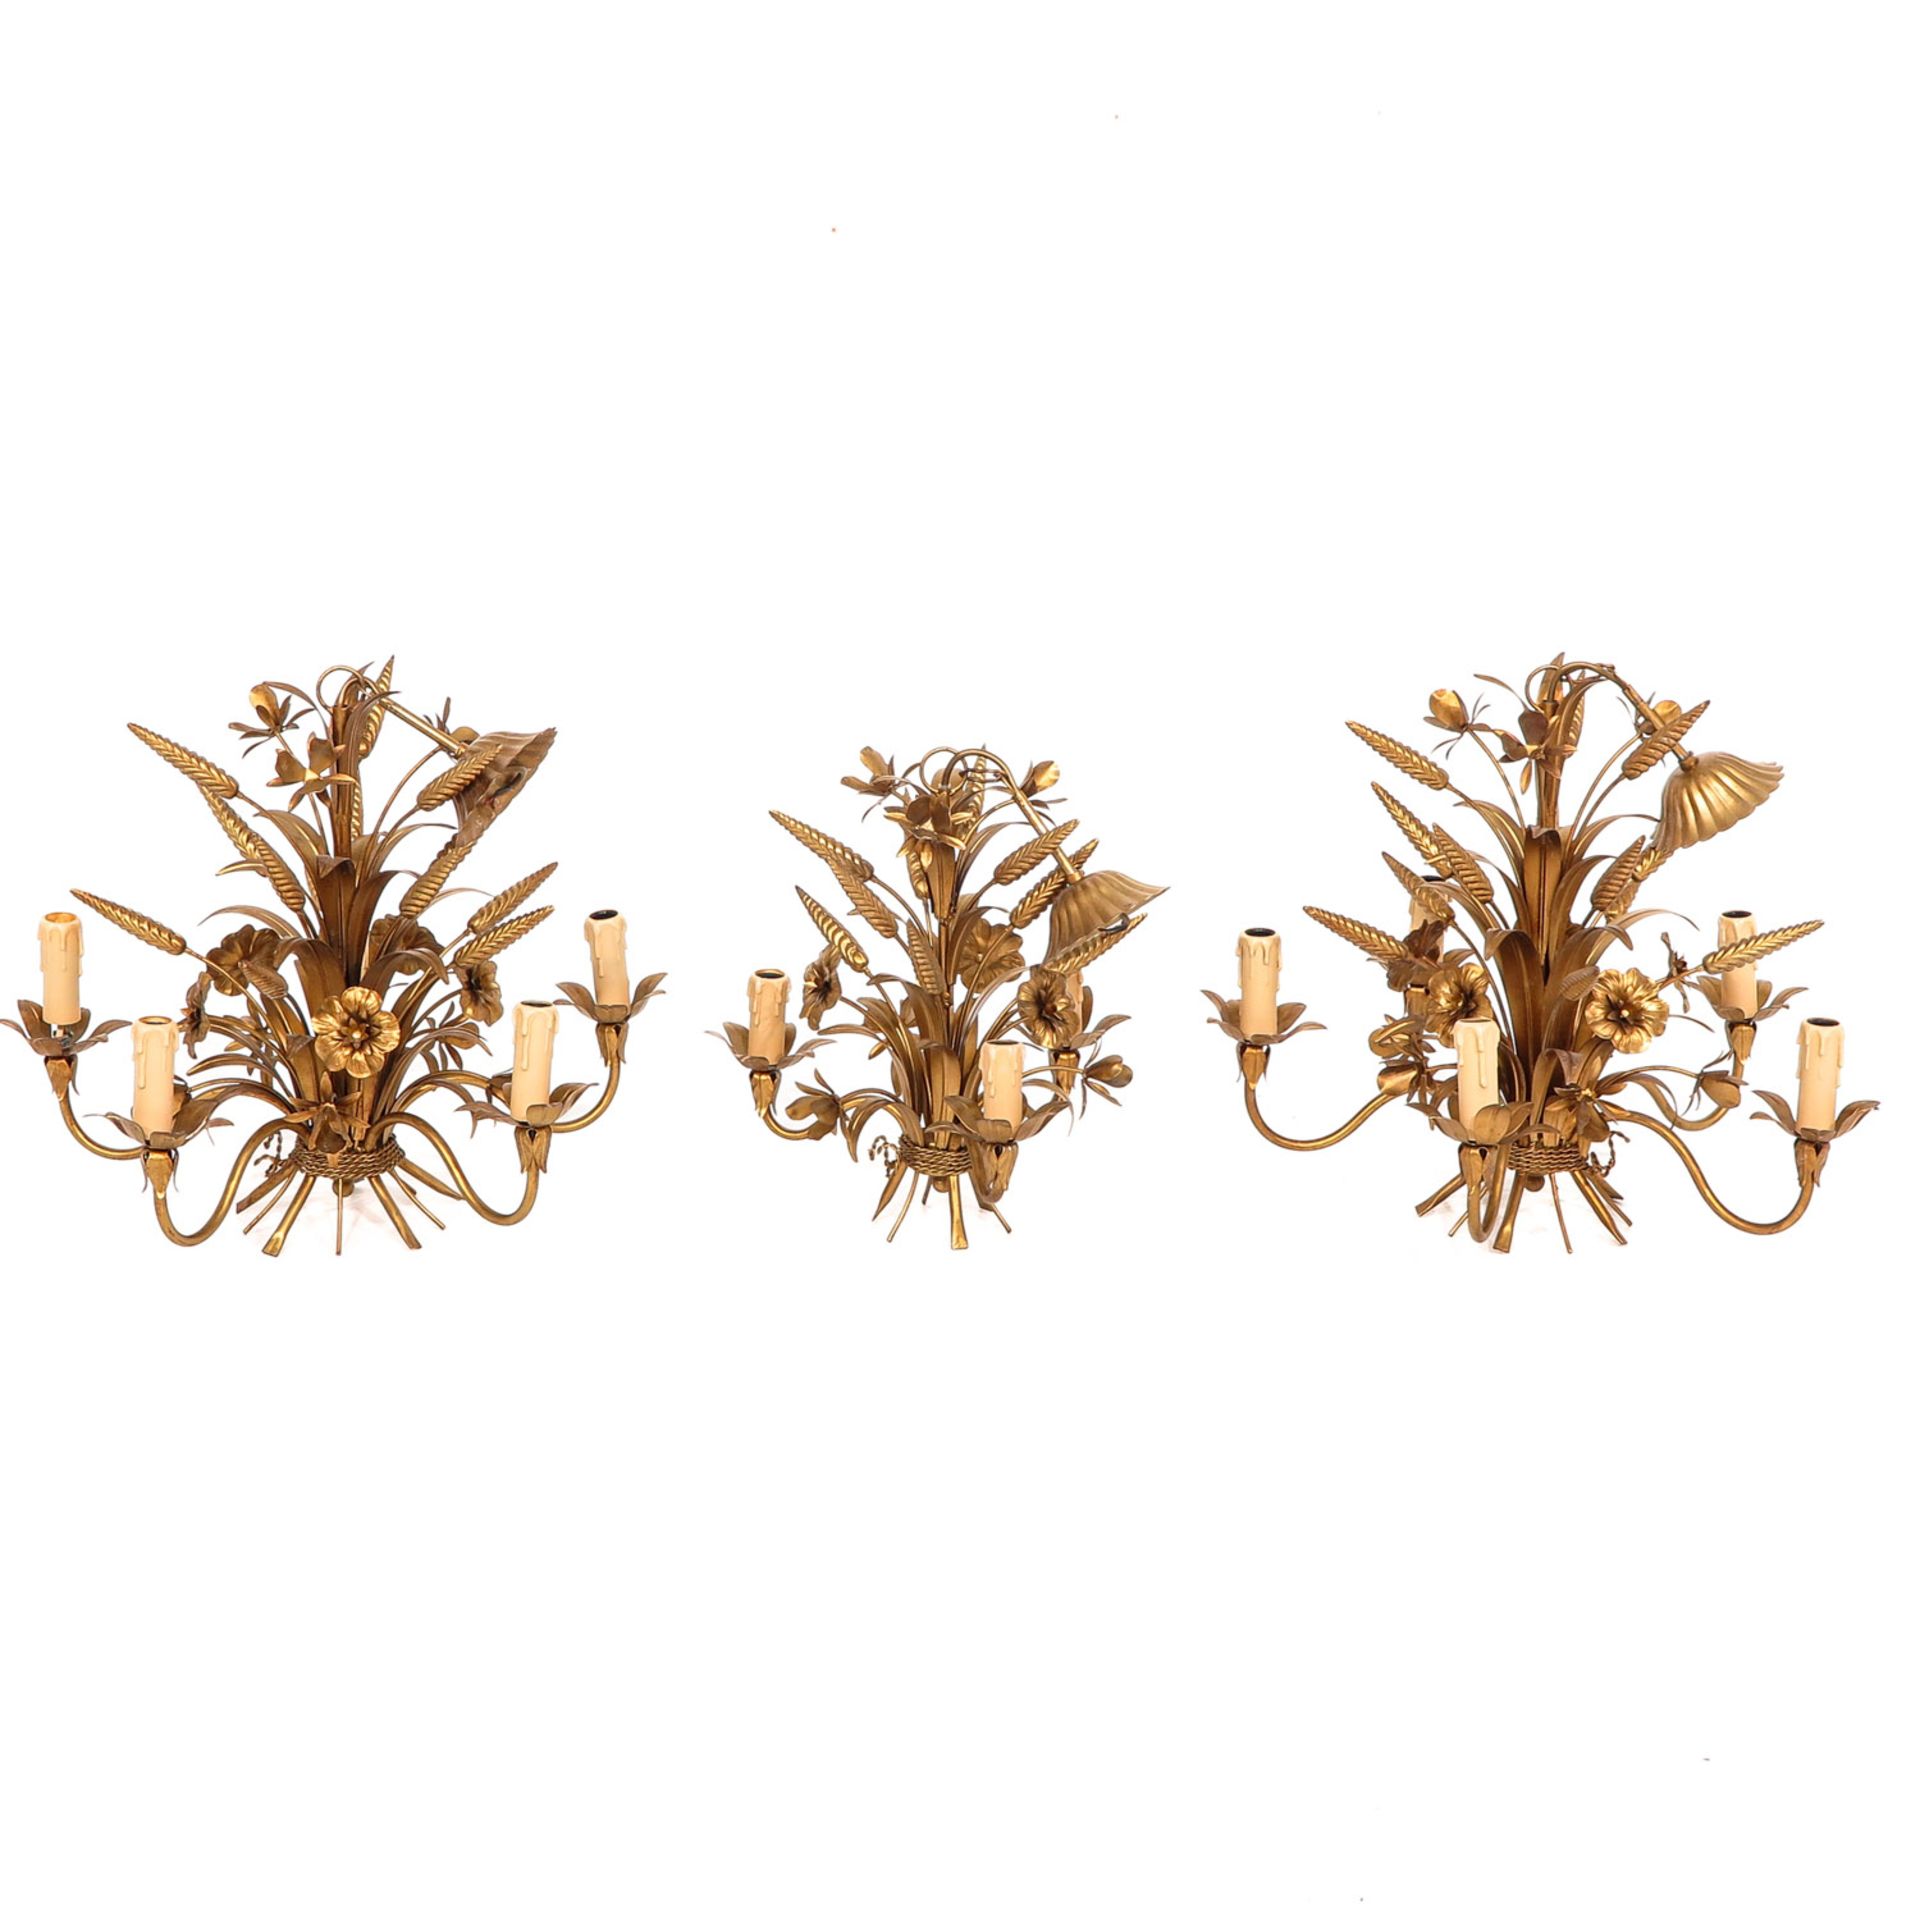 A Collection of 3 Wheat Chandeliers - Image 2 of 9